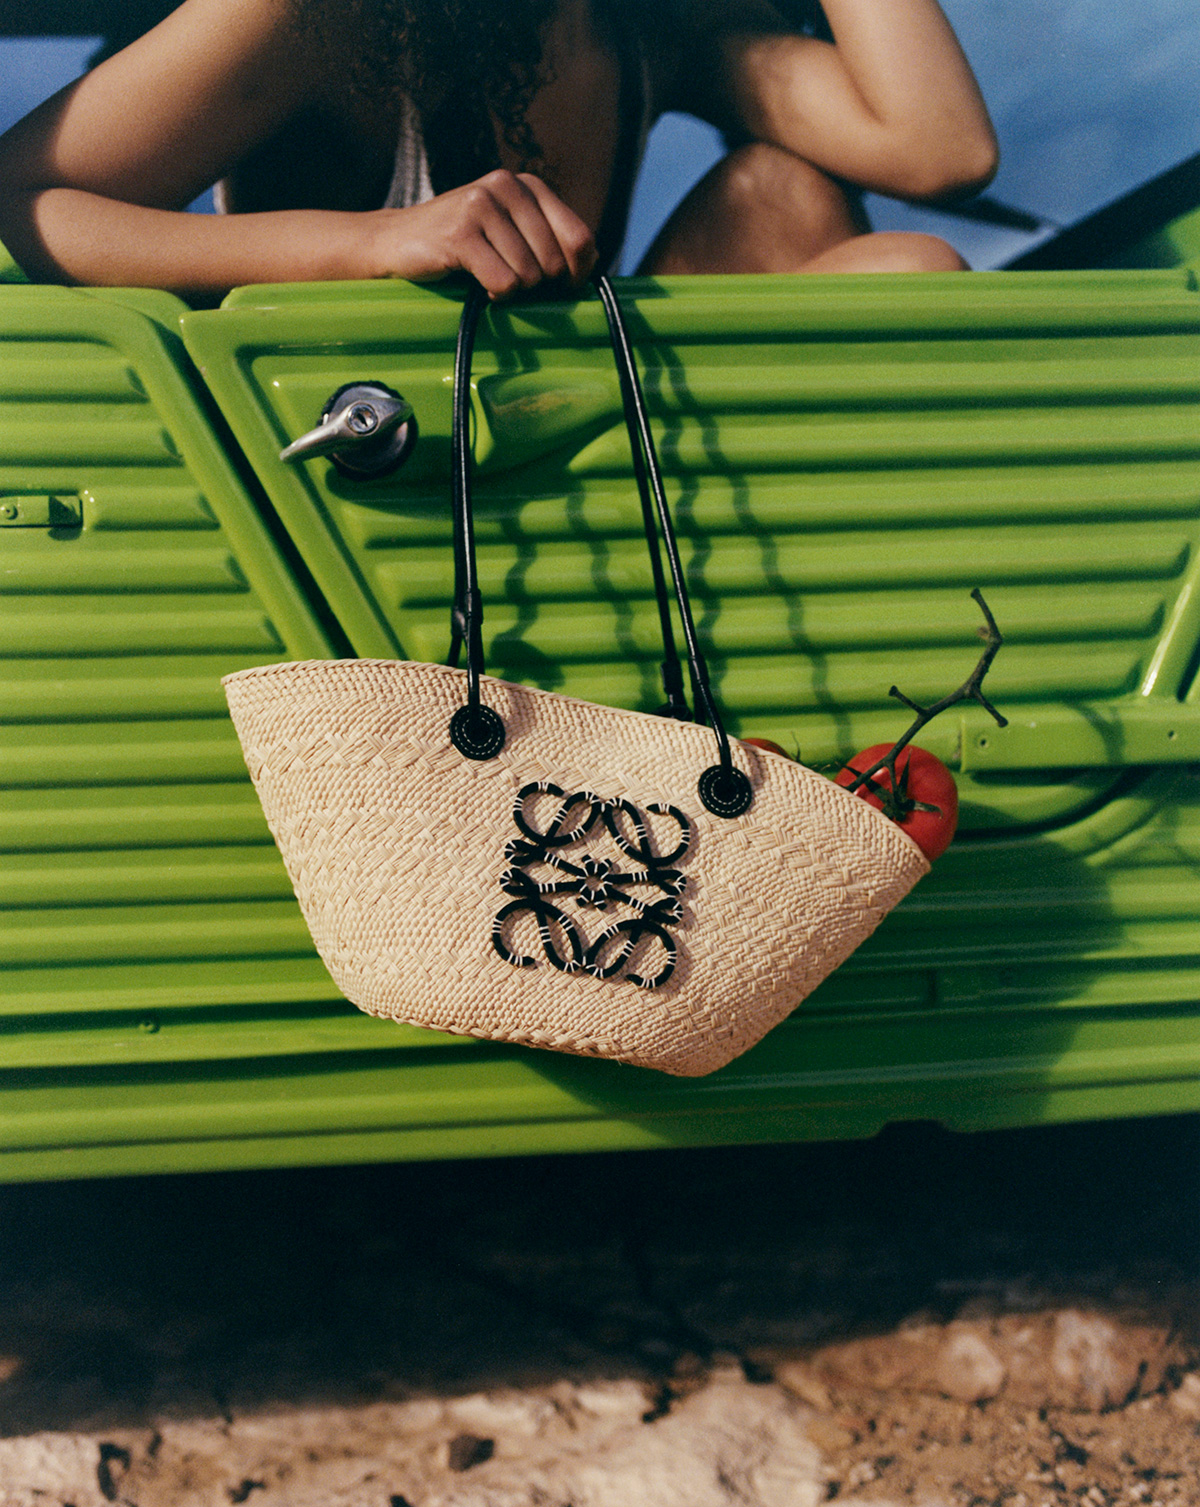 model holding loewe bag with tomates inside, green truck as background